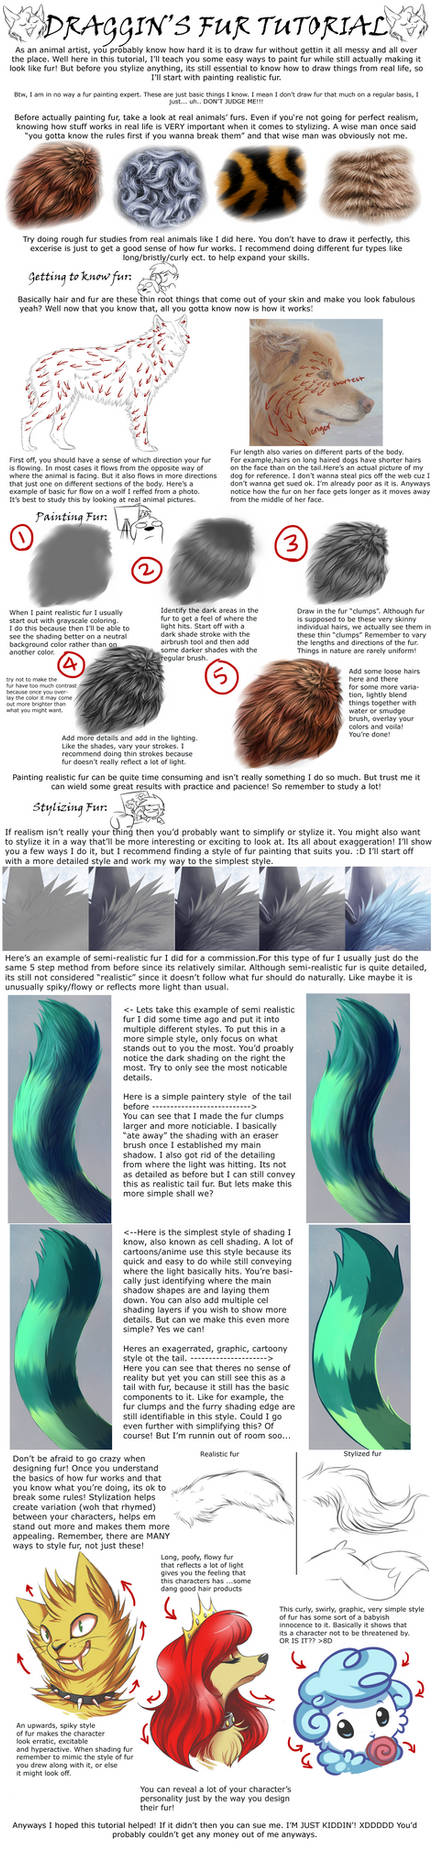 Painting and Stylizing Fur Tutorial